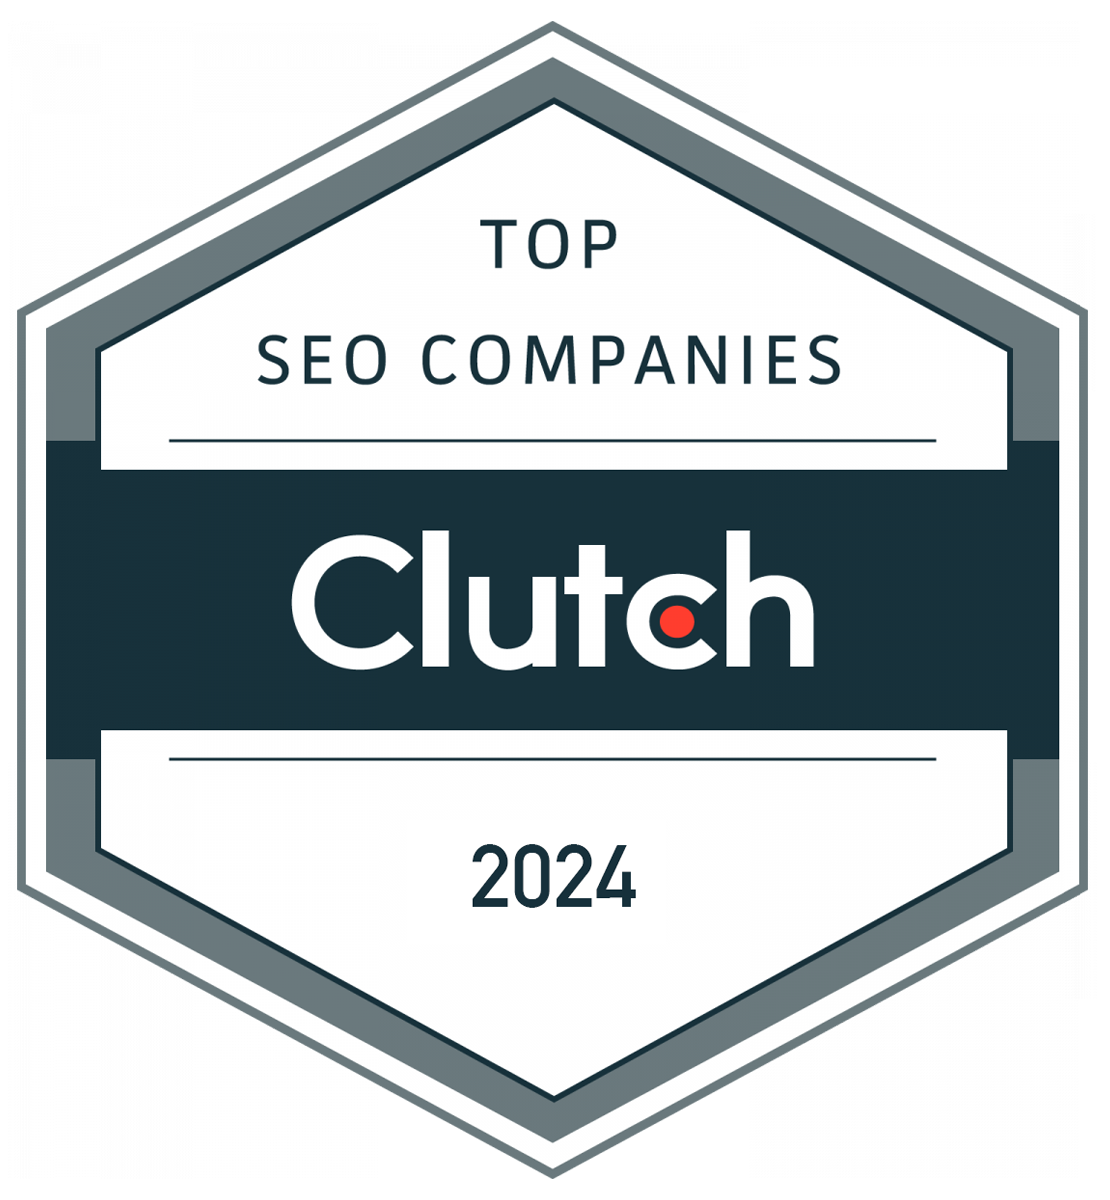 Top-SEO-Companies-2021-by-Clutch_new.png